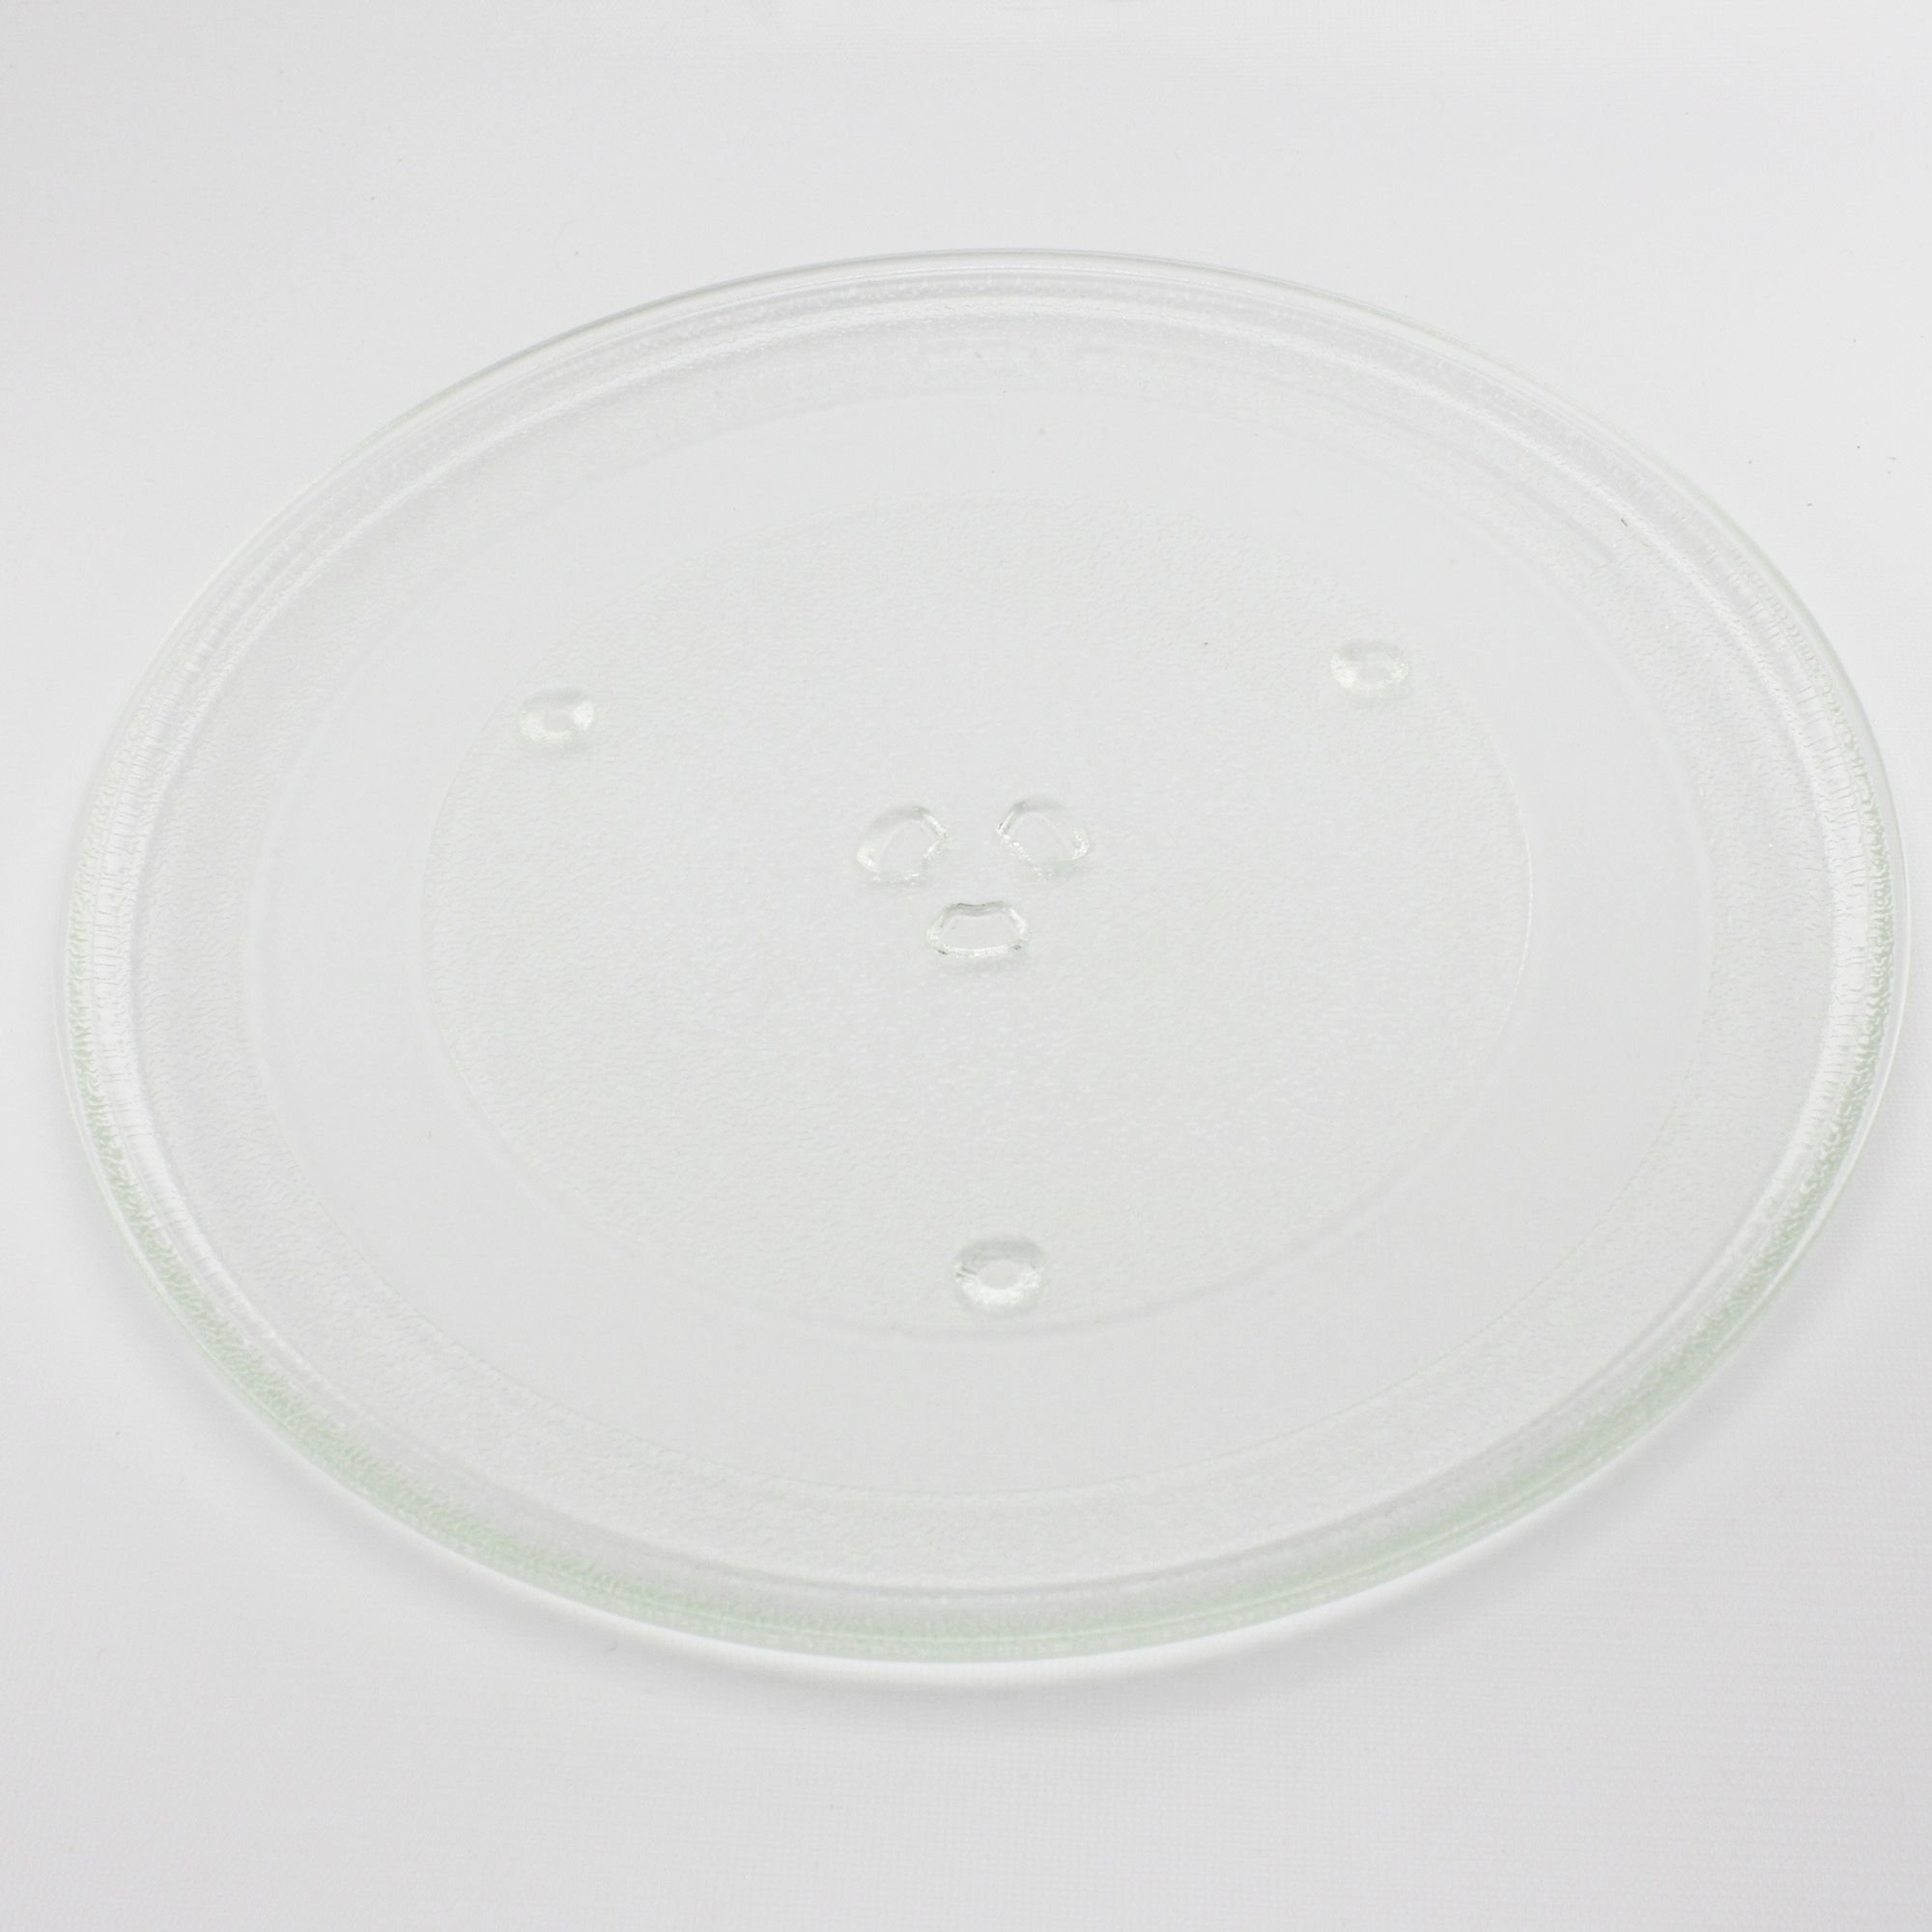 Panasonic Microwave Glass Cooking Tray. Part #F06014T00AP